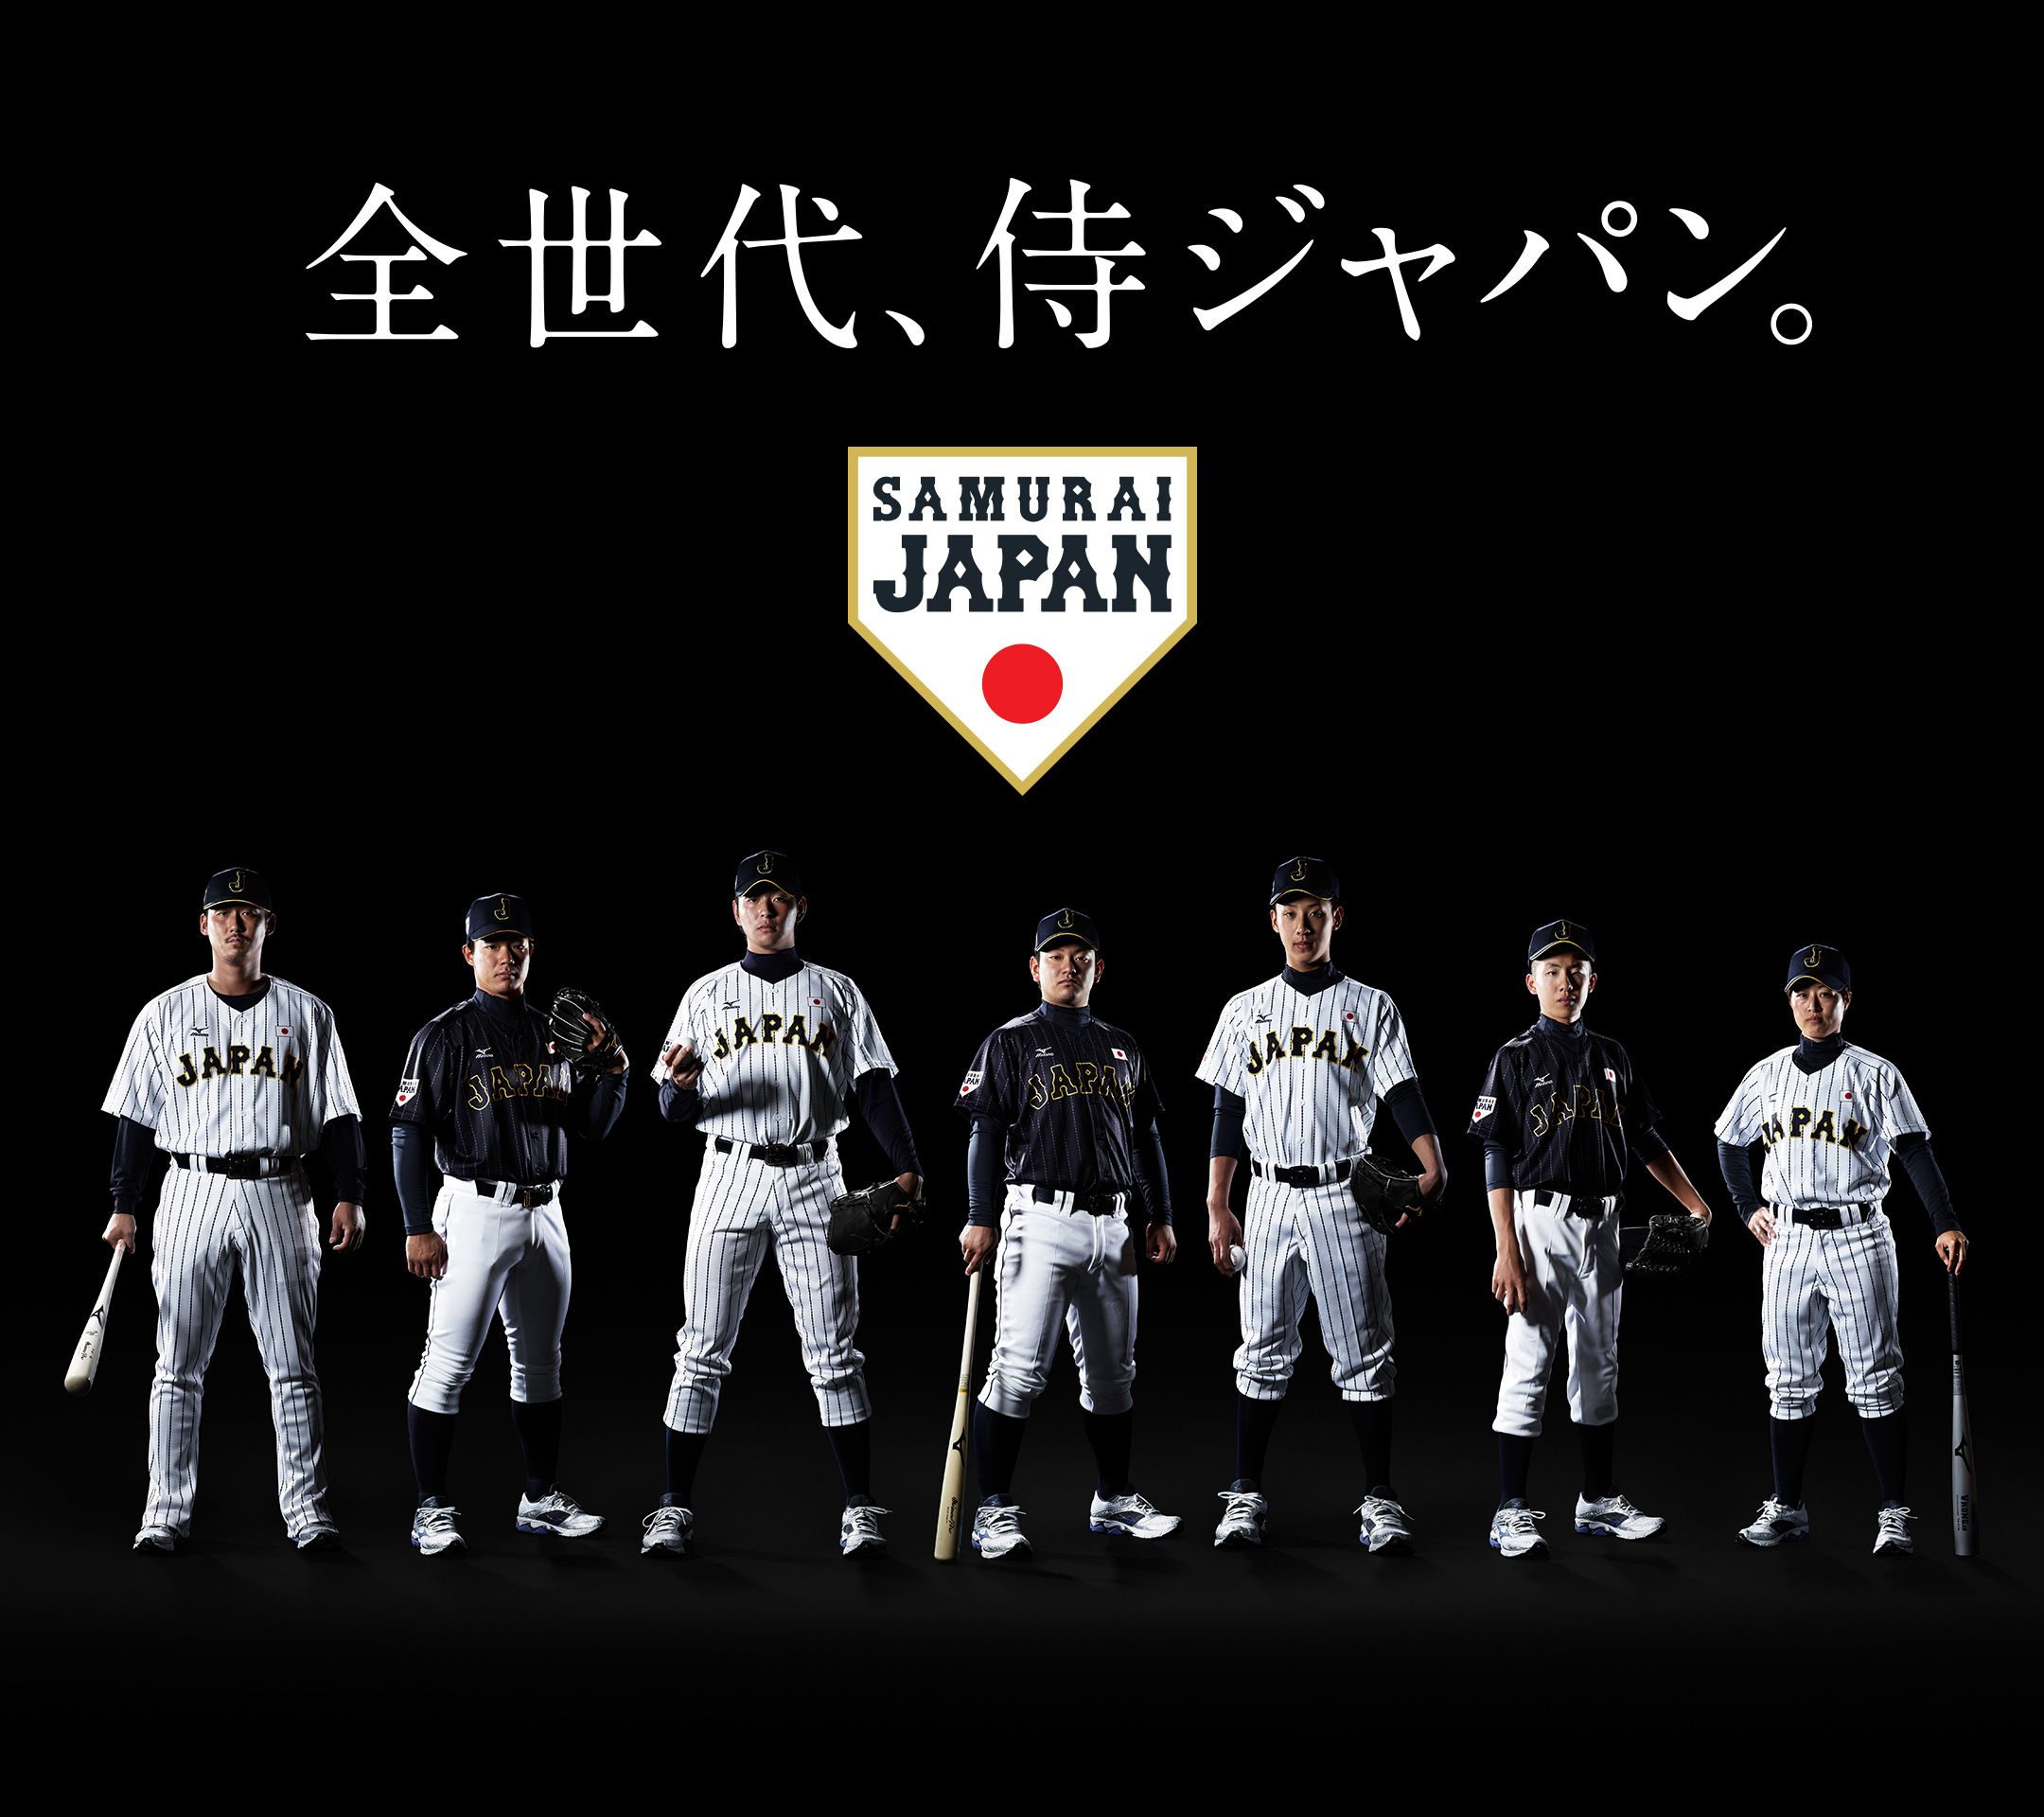 The Official Site of the Japan National Baseball Team